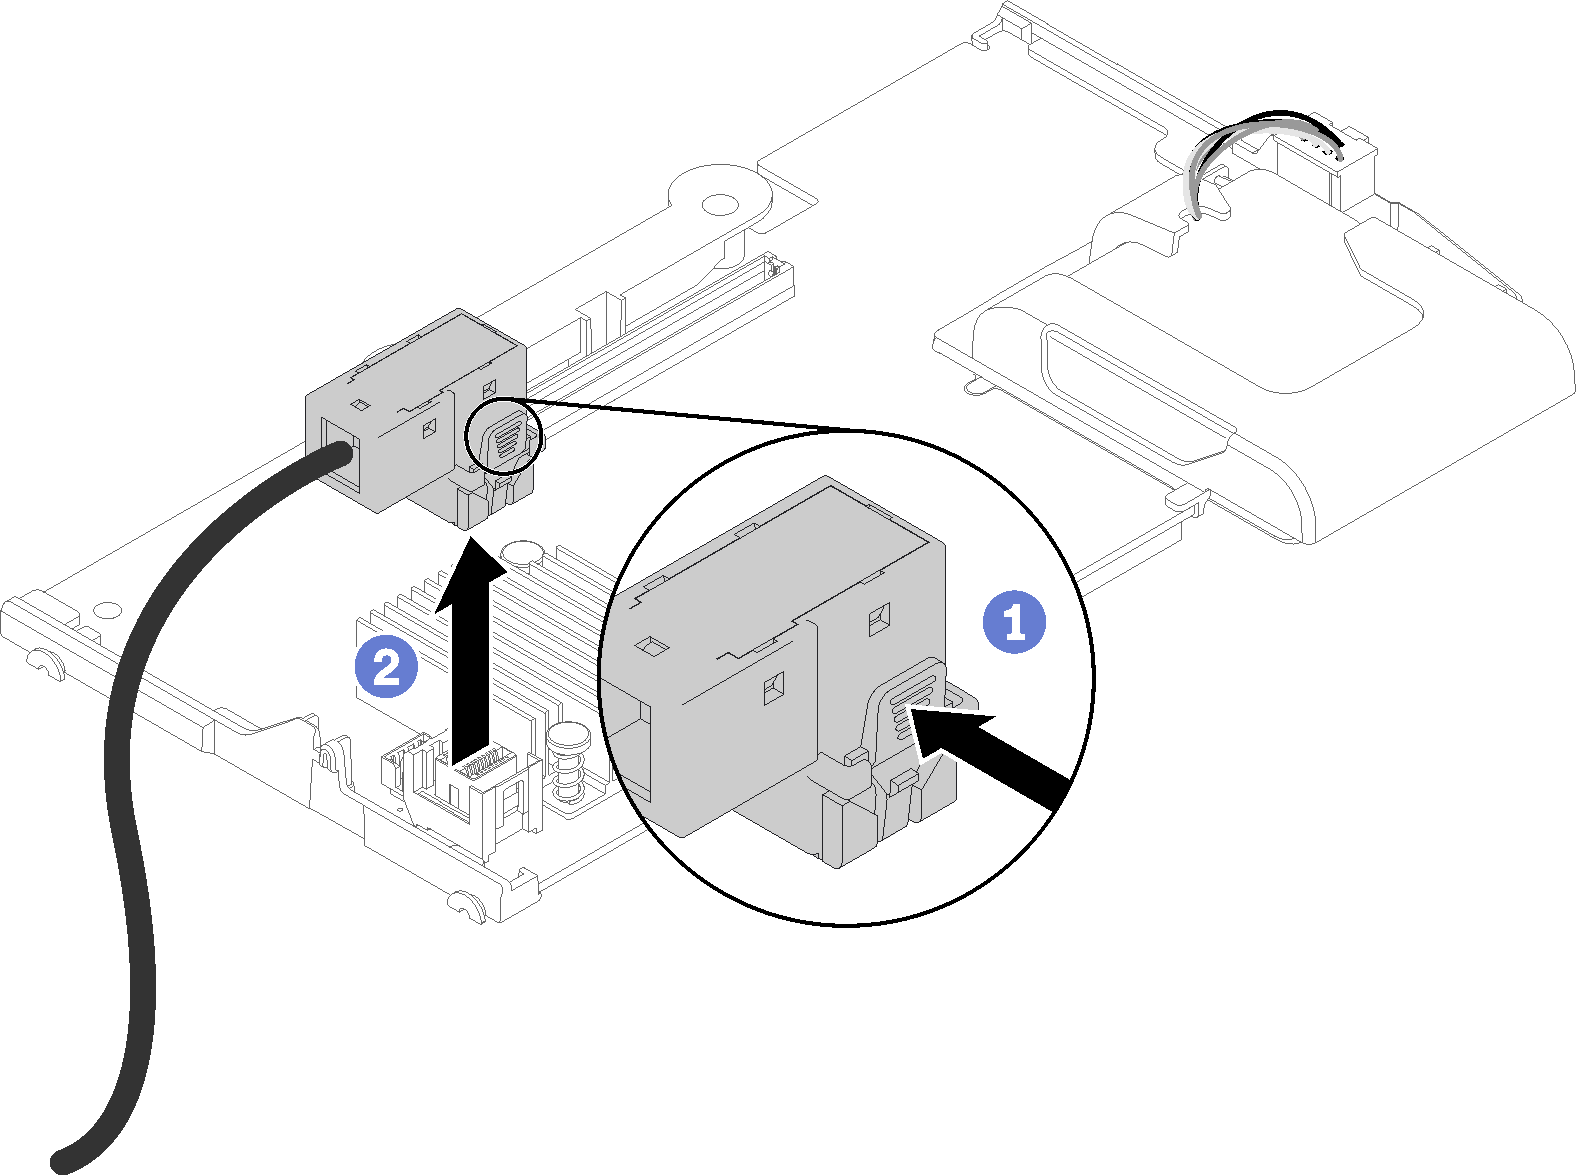 Graphic illustrating disconnecting the cable